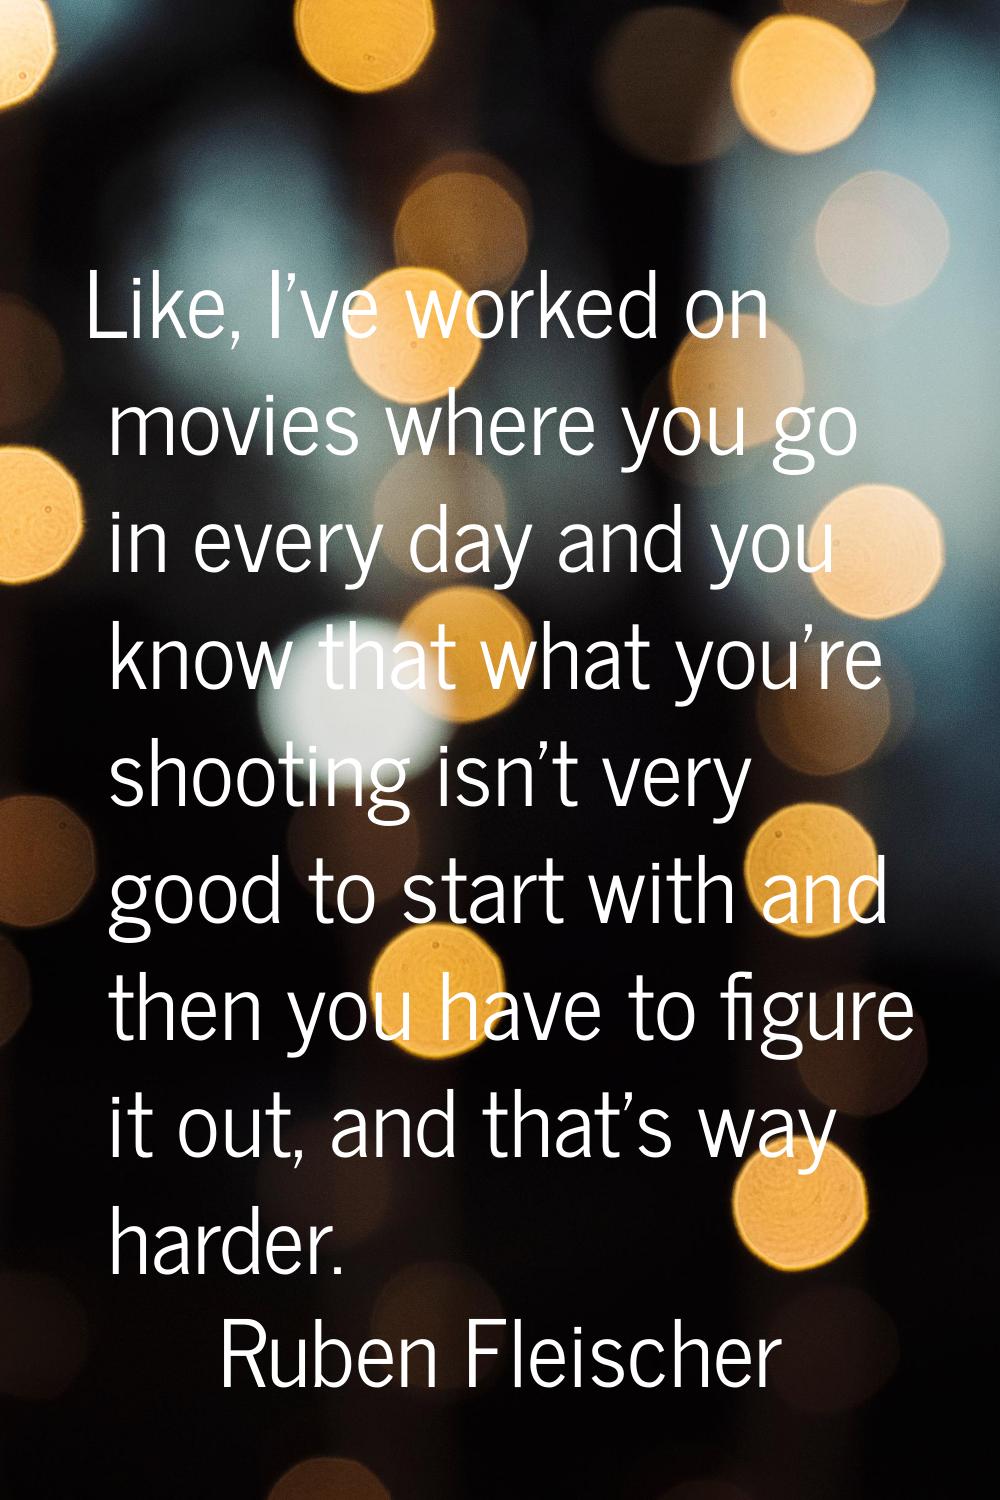 Like, I've worked on movies where you go in every day and you know that what you're shooting isn't 